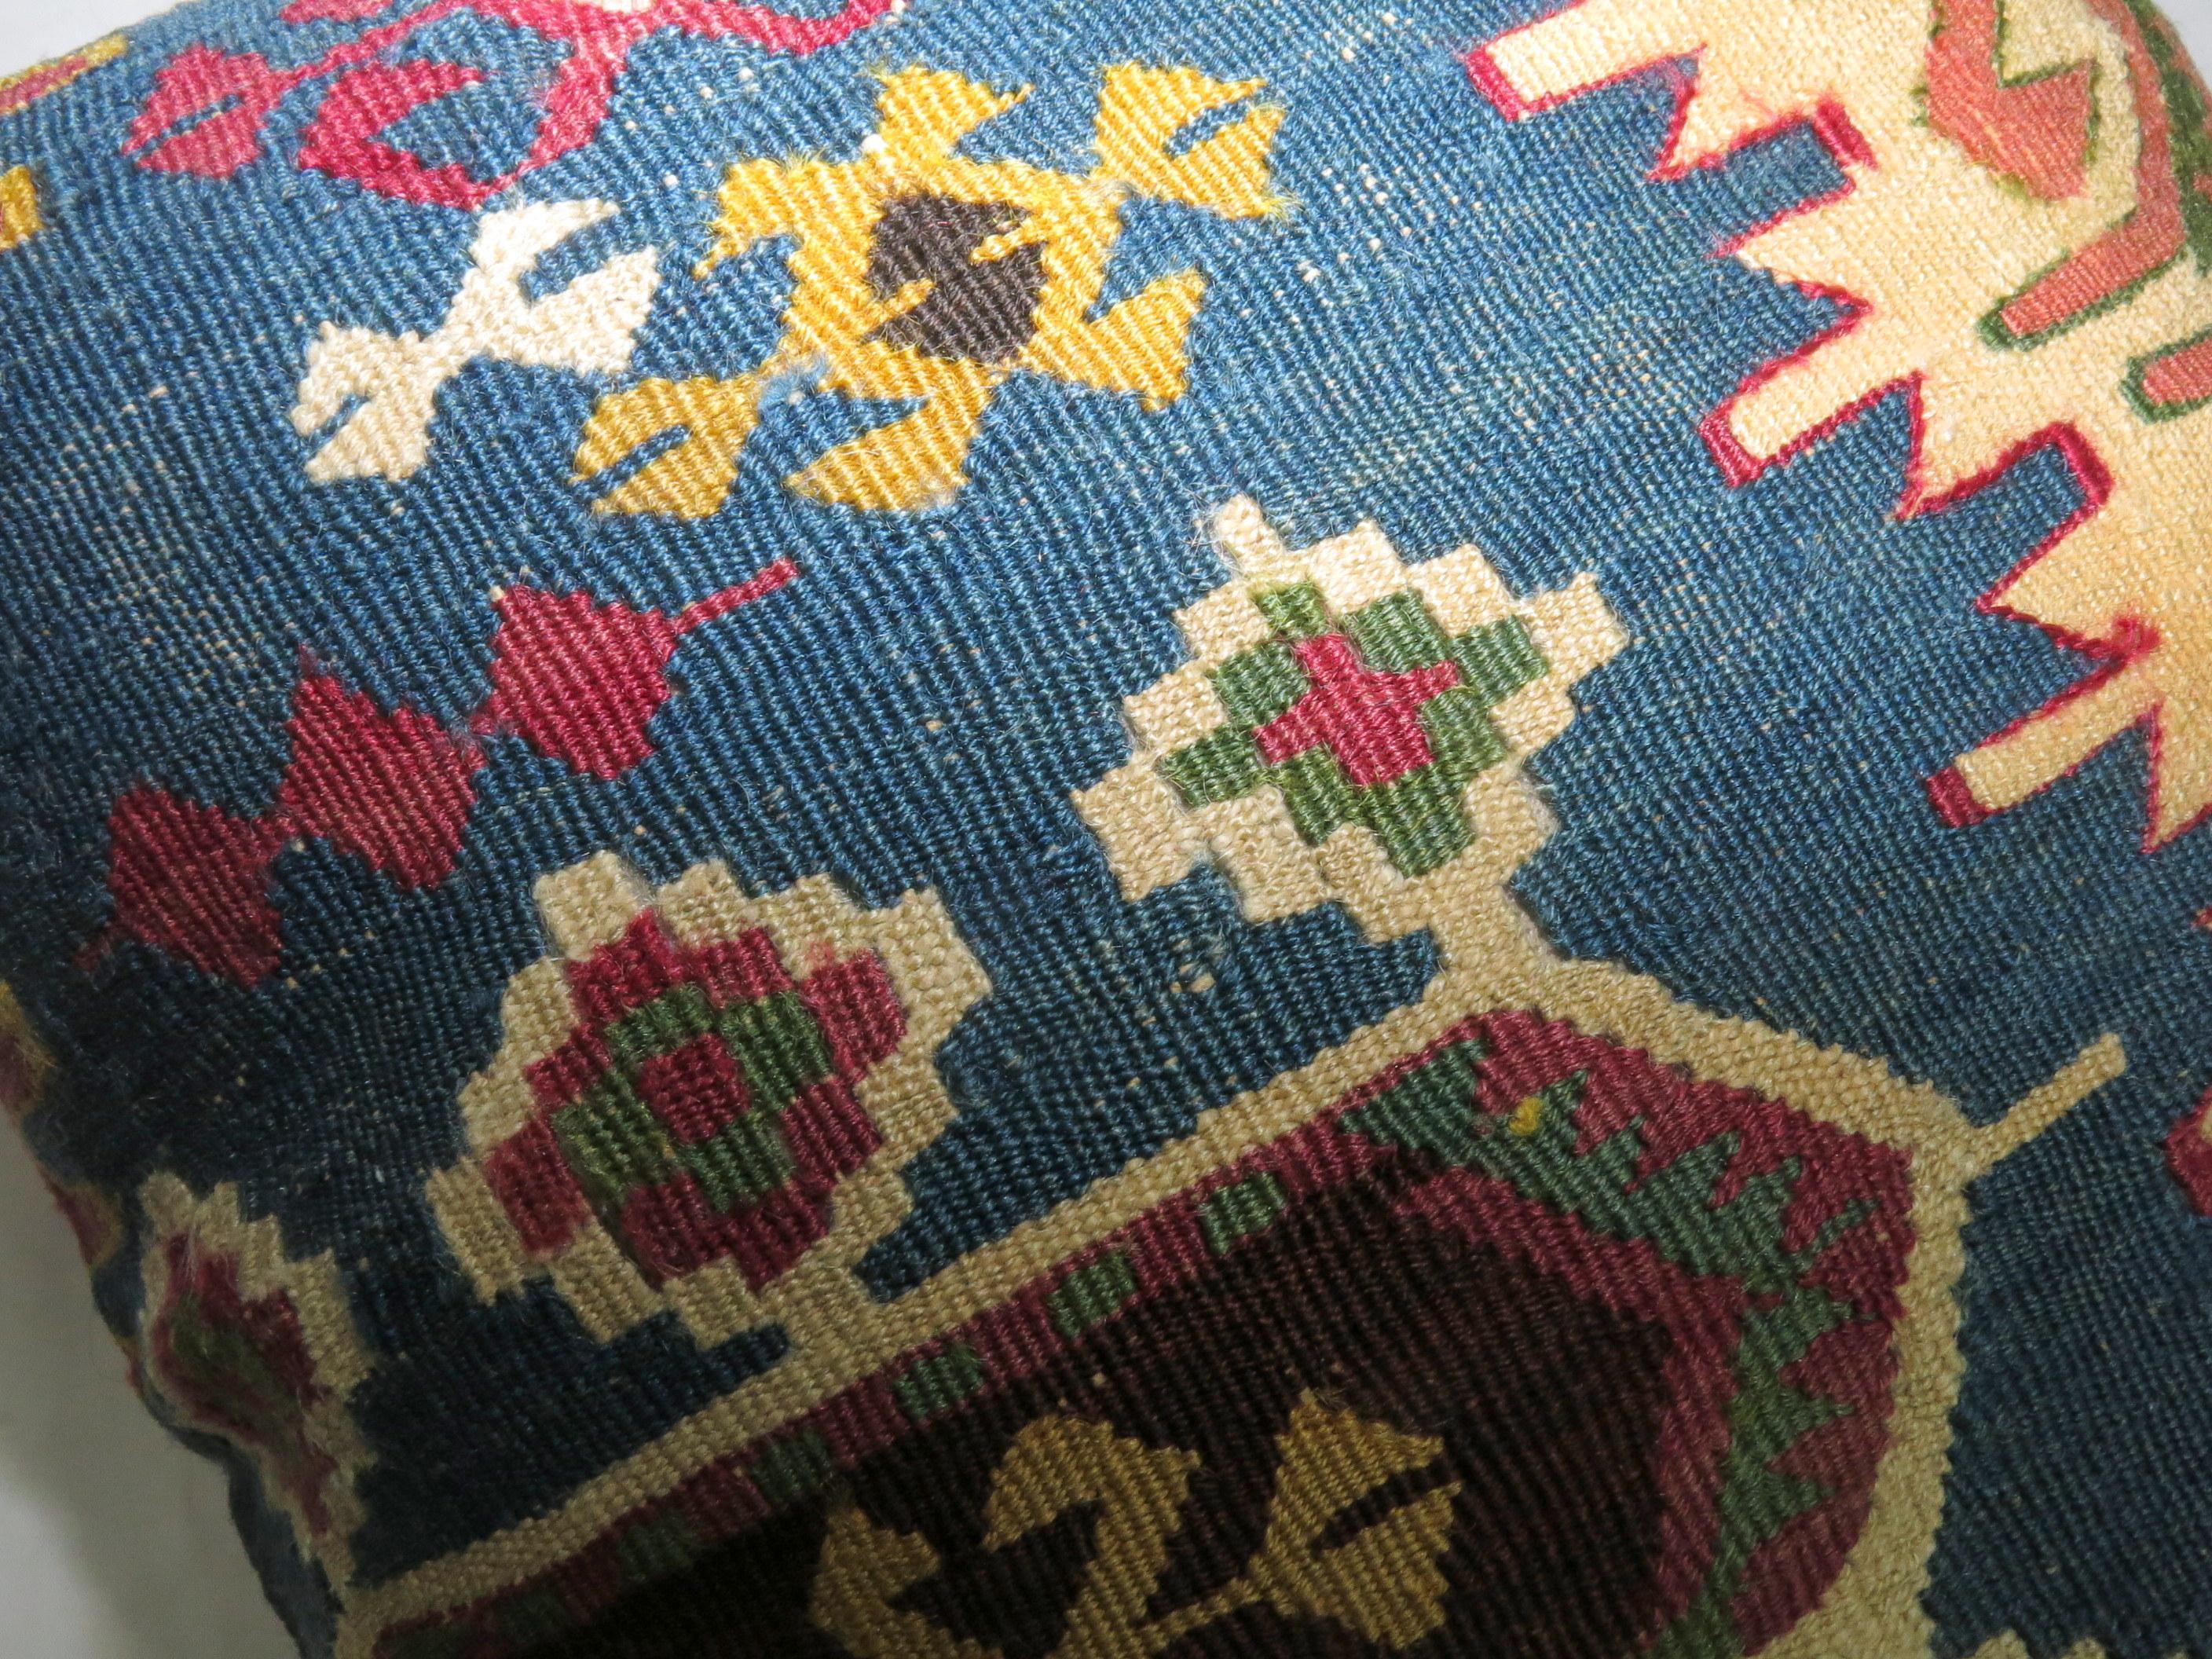 Pillow made from a Persian Kilim.

19'' x 23''